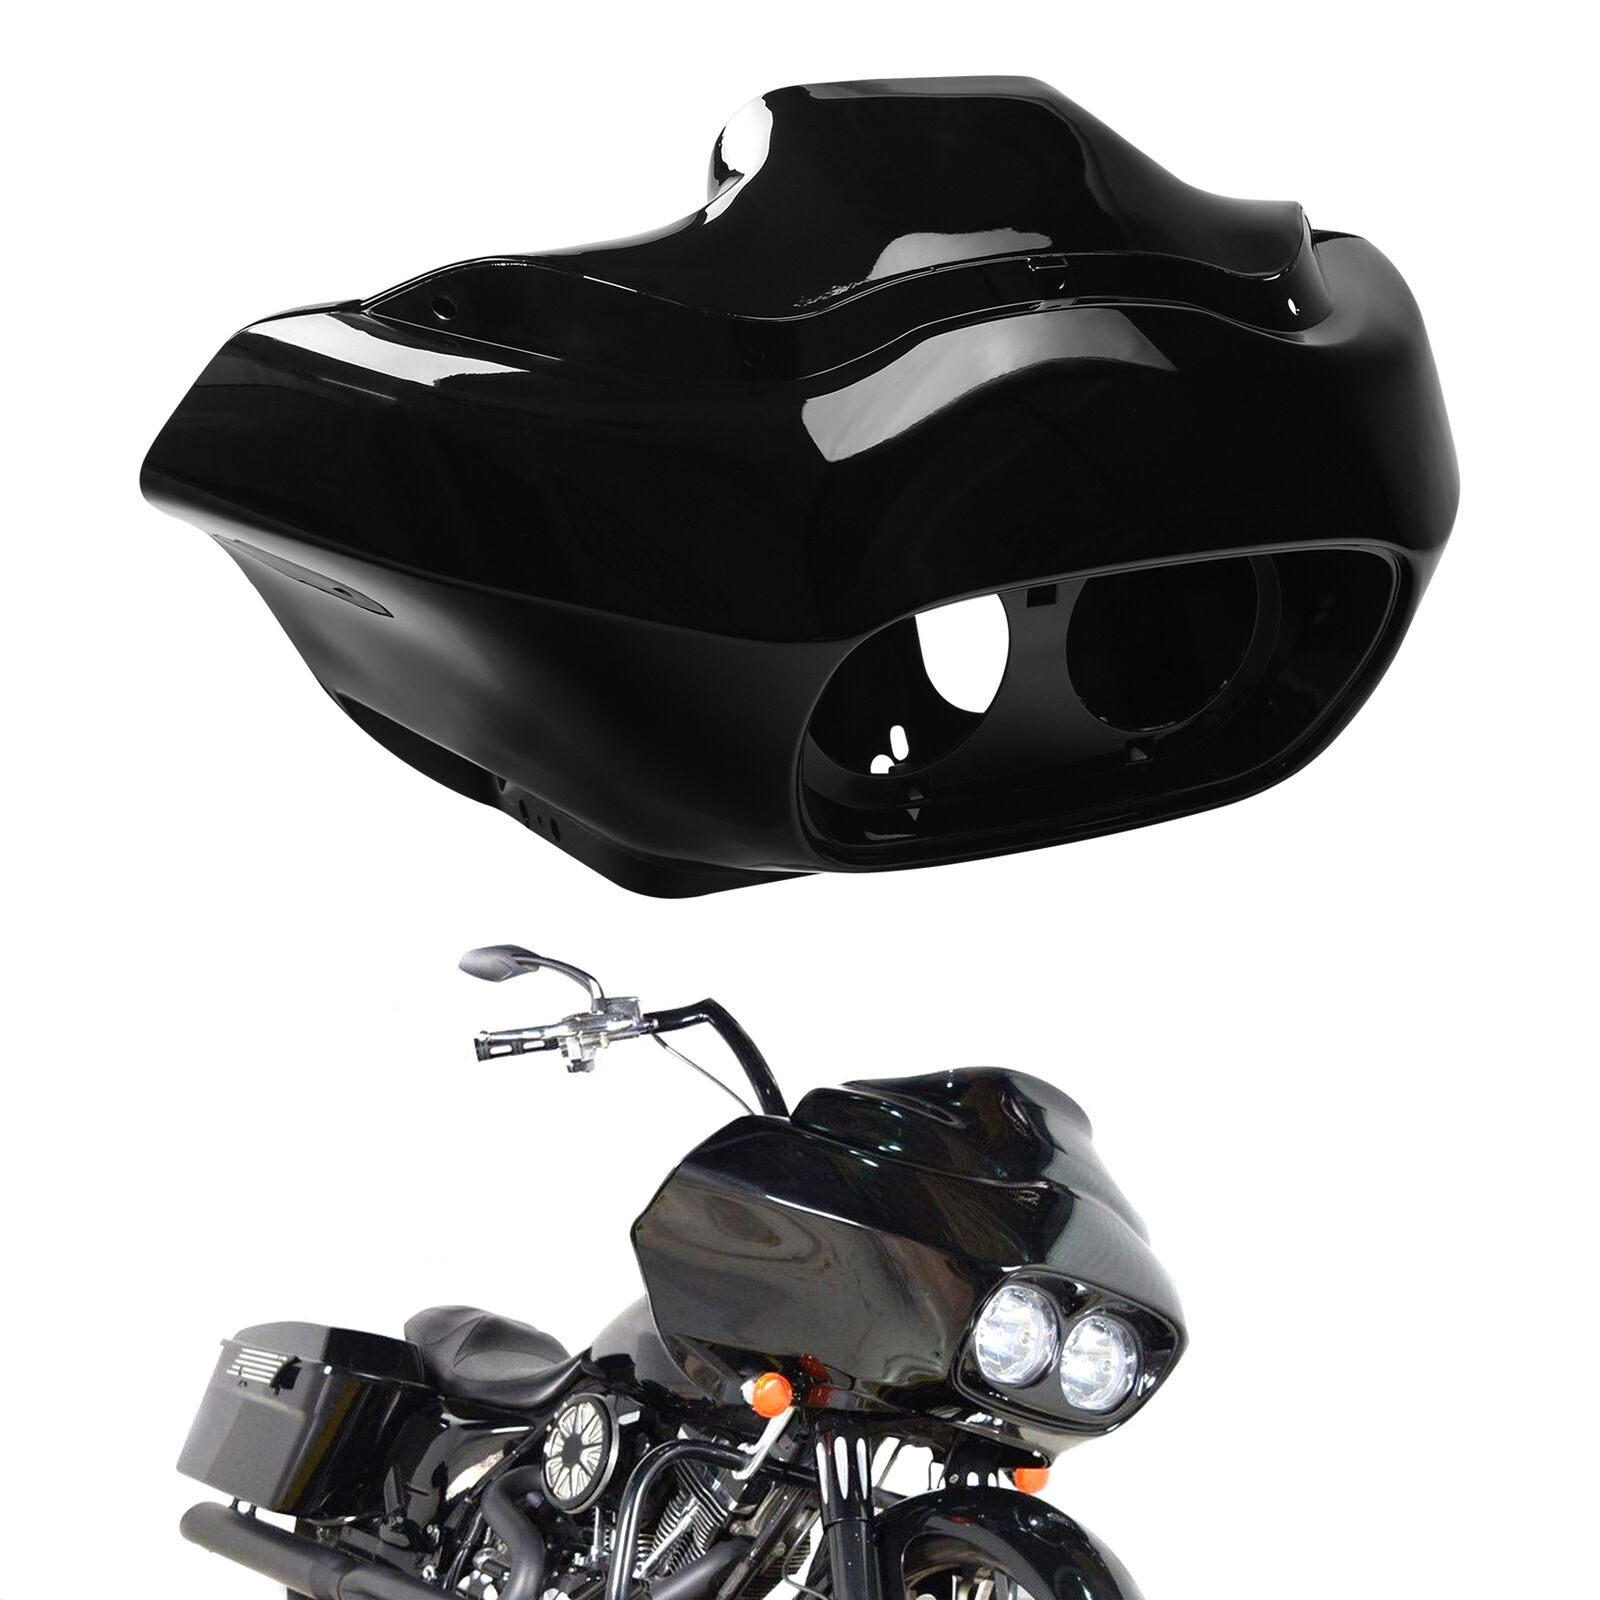 Injection Inner and Outer Fairing Fit For Harley Road Glide FLTR 1998-2013 US